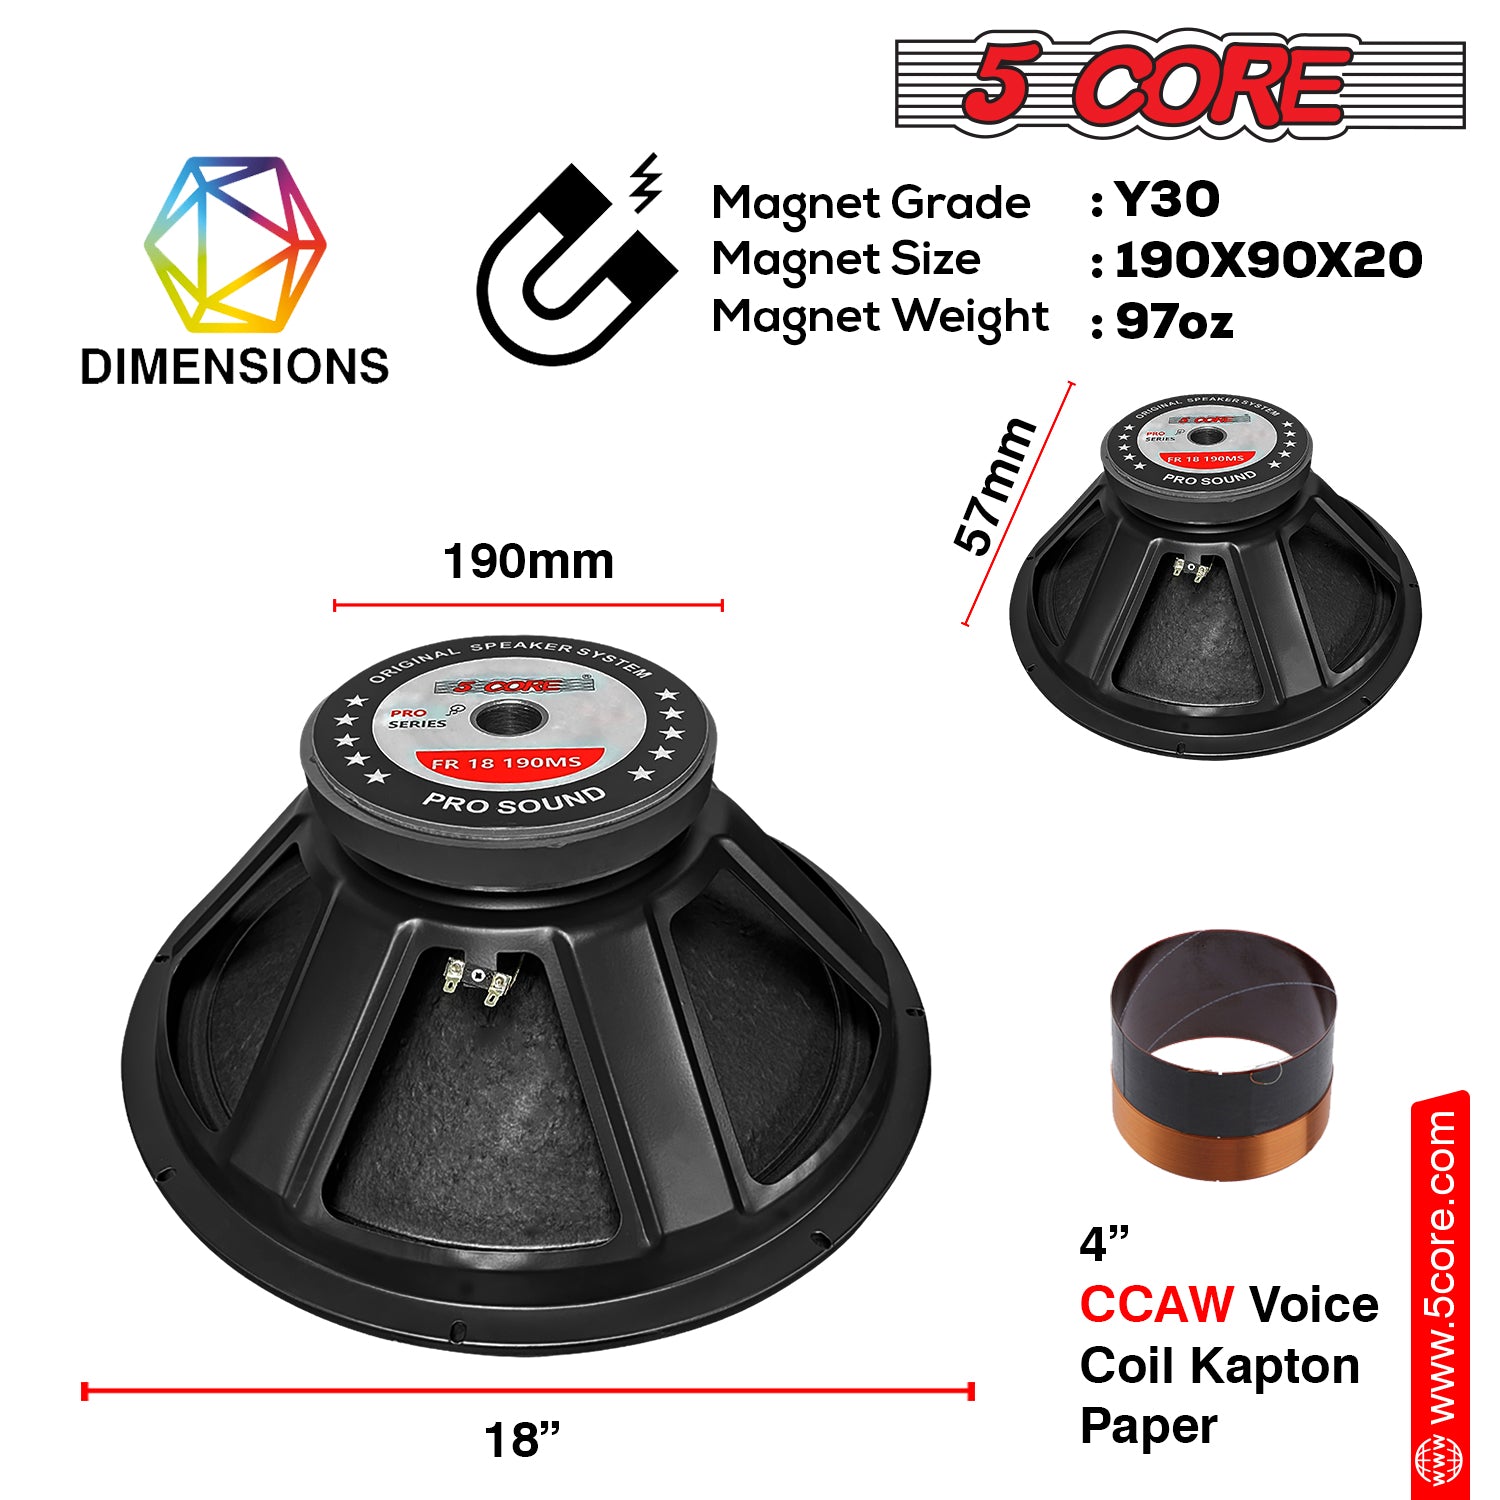 Dynamic 18 Inch Full Range Speaker has Y30 magnet grade and 97oz magnet weight.